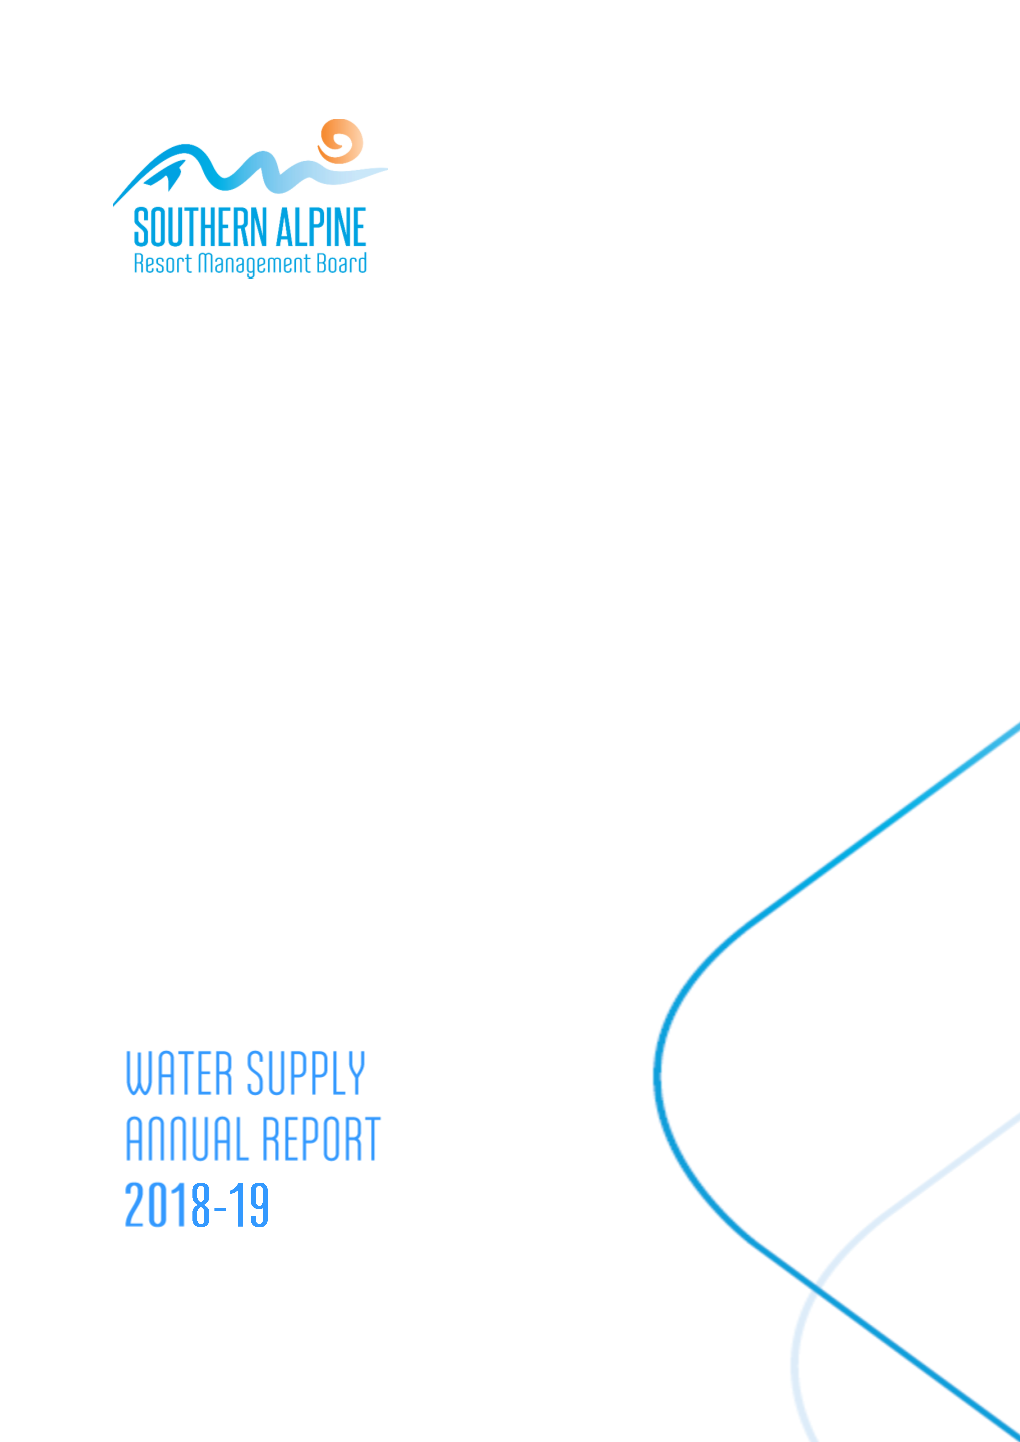 2018-19 Water Supply Annual Report